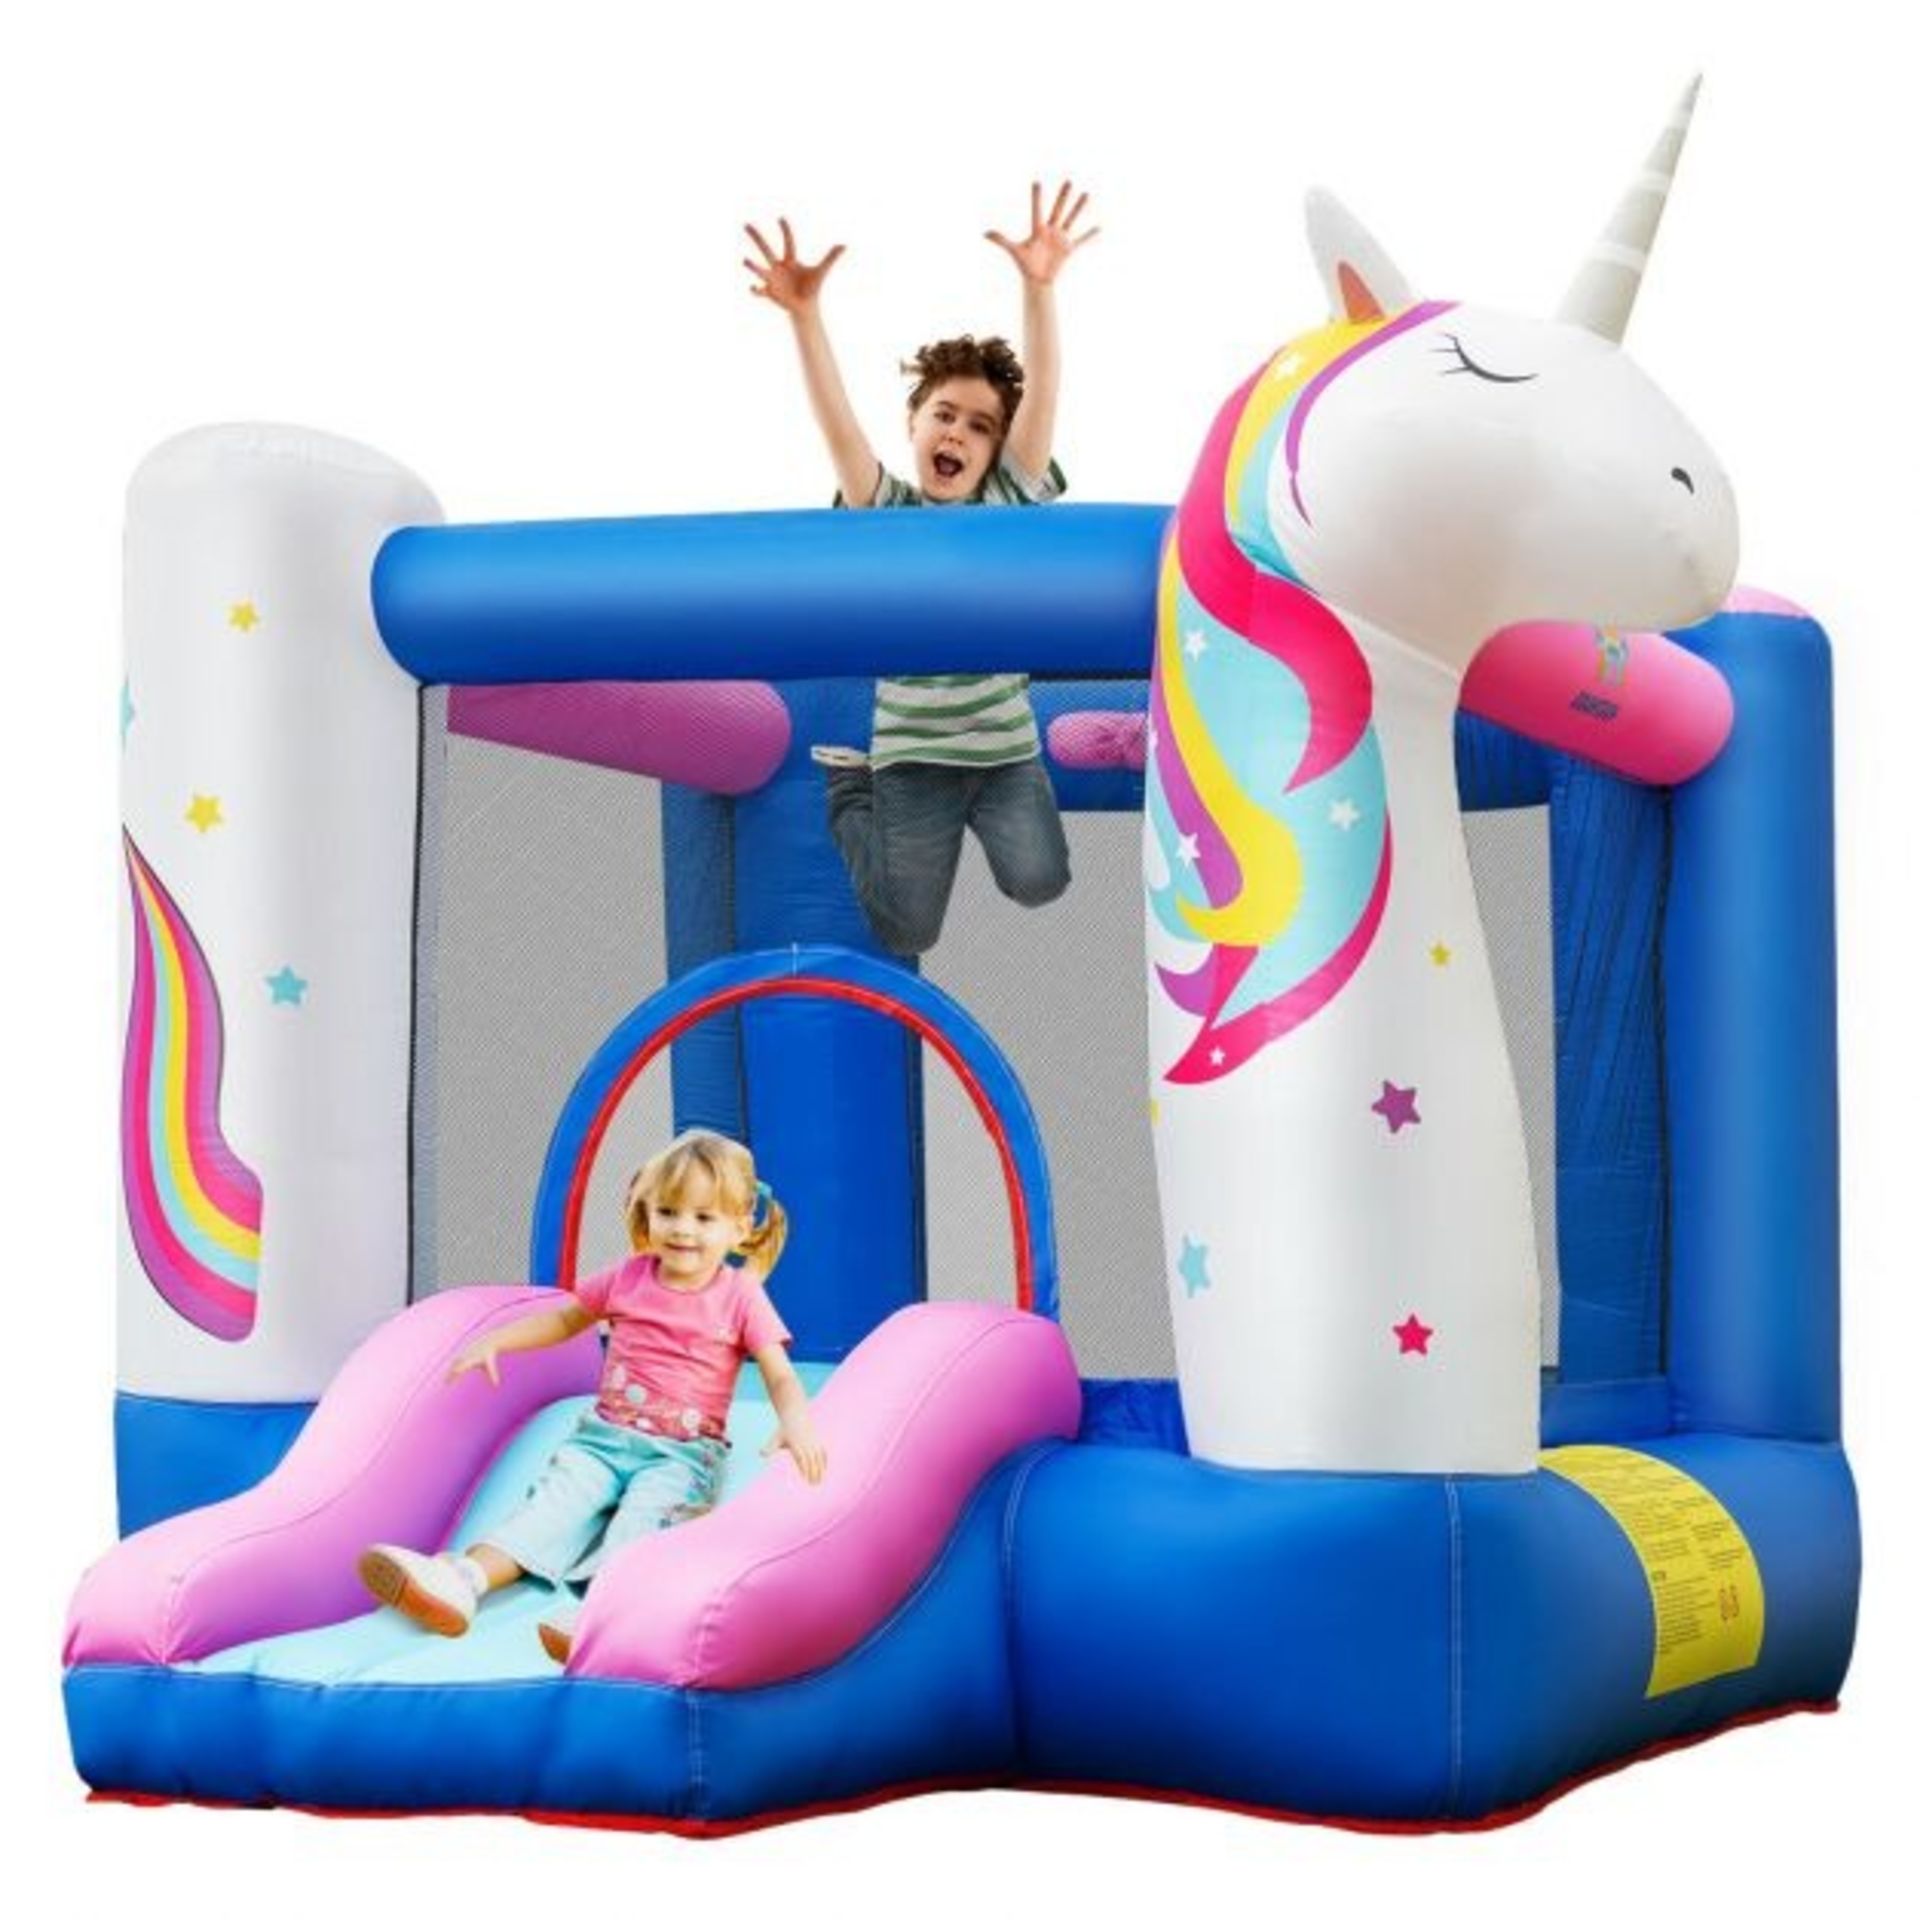 Inflatable Bounce House Unicorn Castle with Slide - ER54